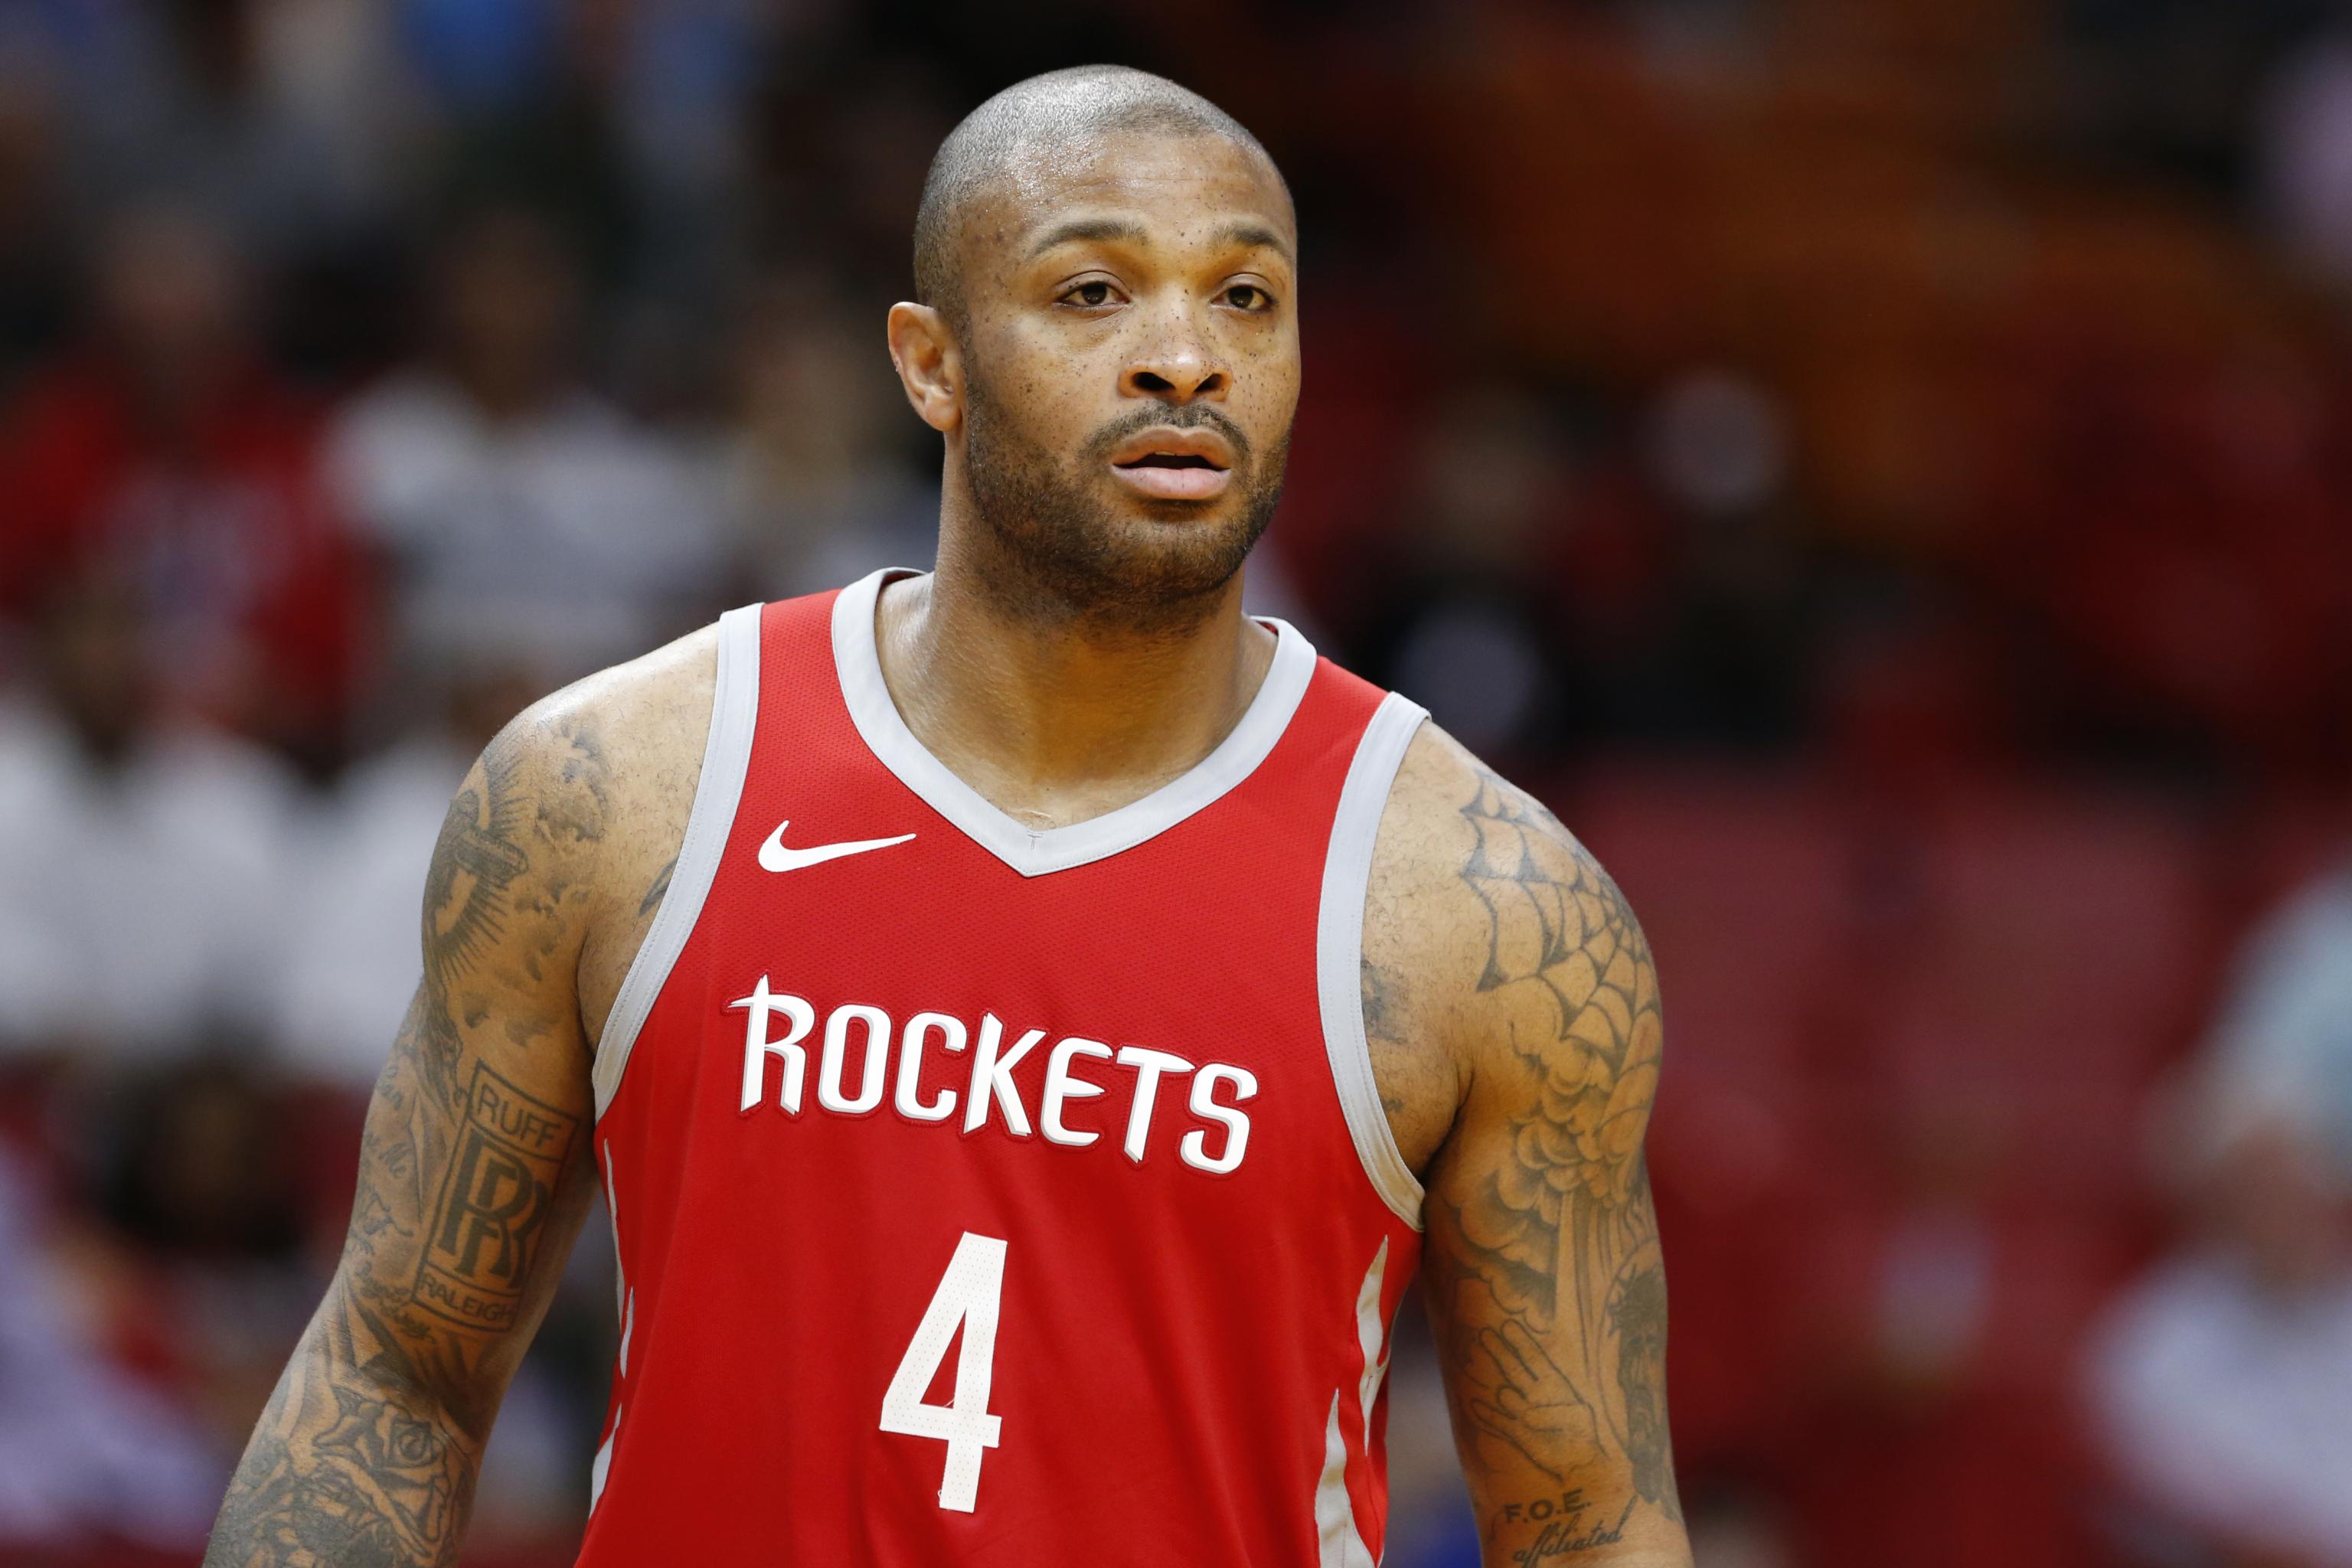 Does anyone know where I can find PJ Tucker's shirt? It's Mitchell